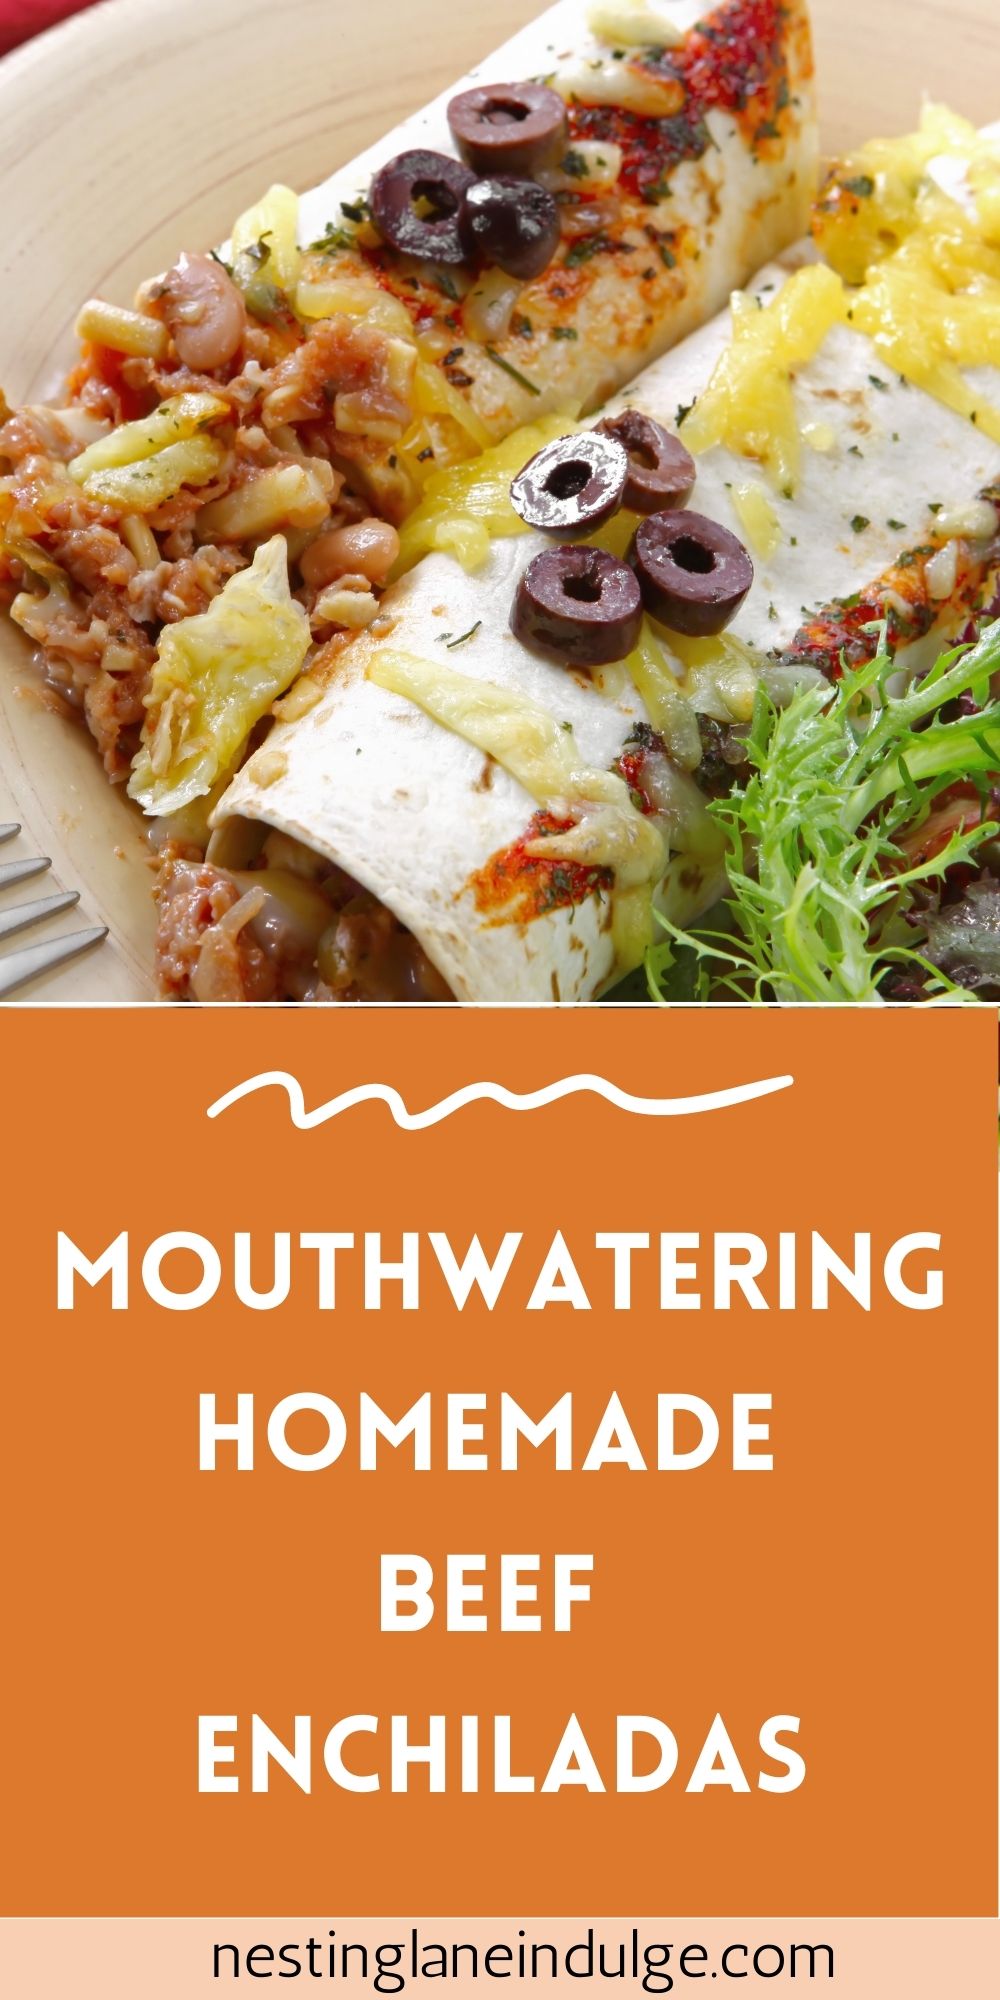 Graphic for Pinterest of Mouthwatering Homemade Beef Enchiladas Recipe.